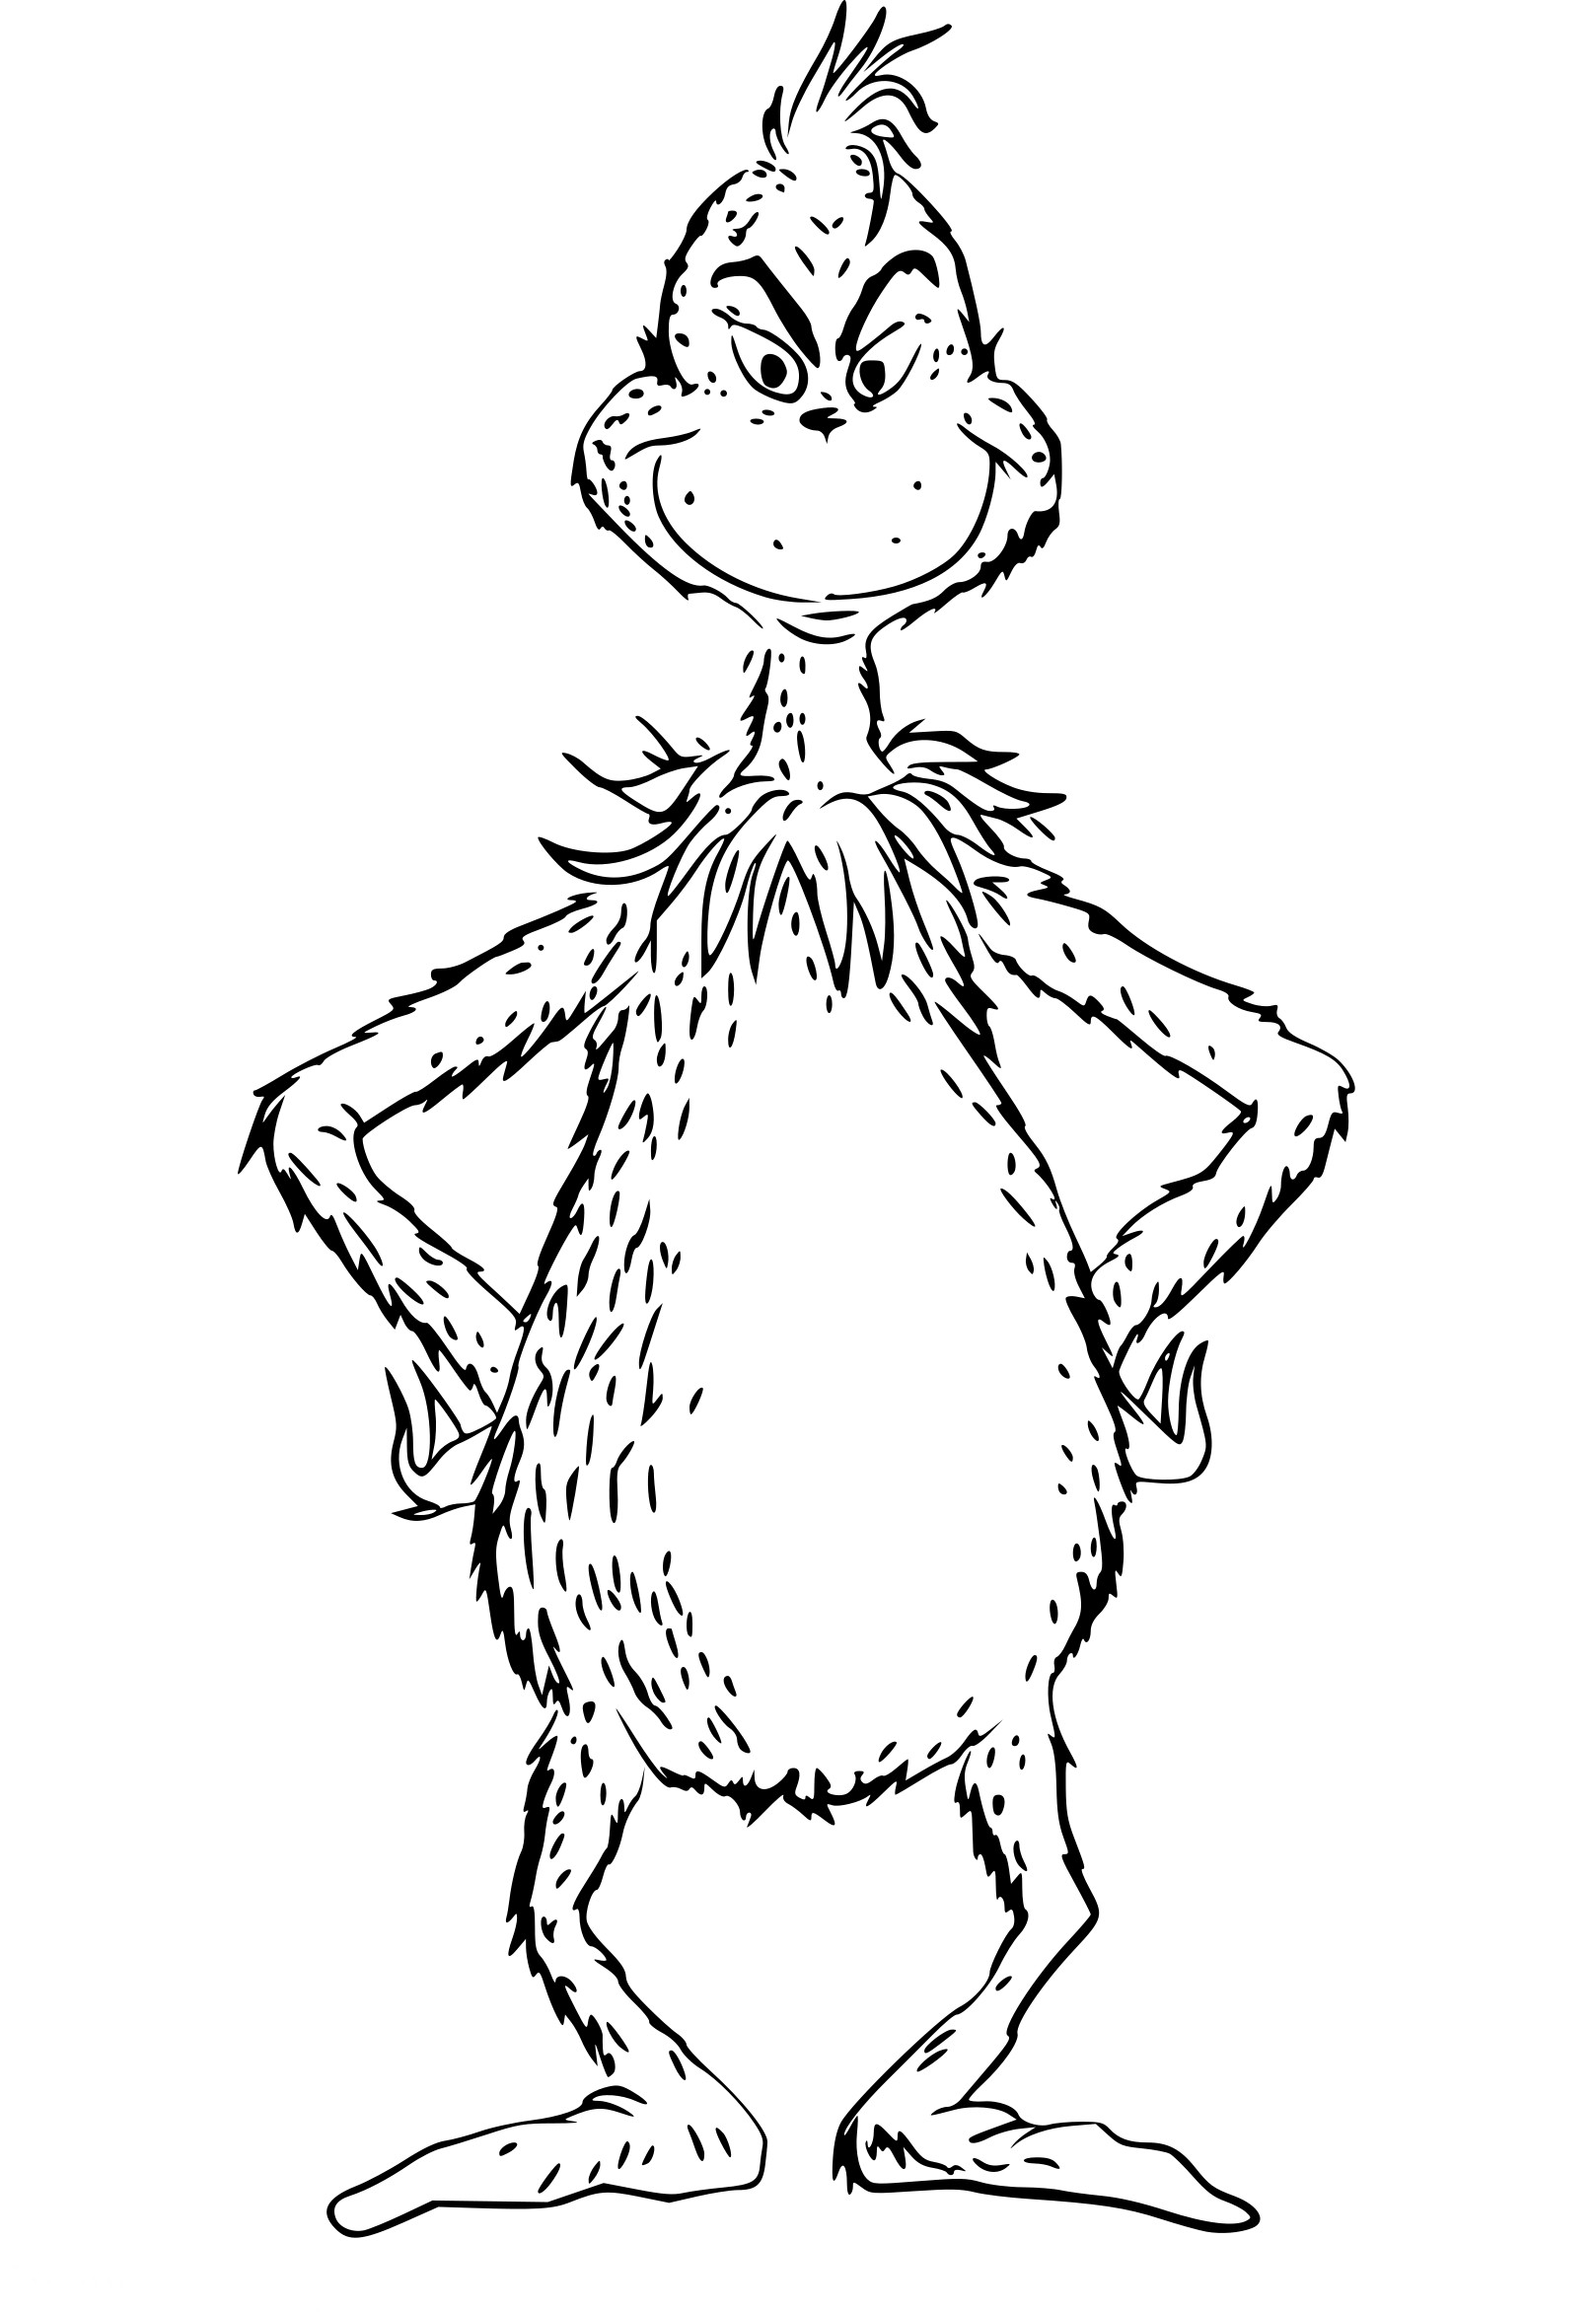 The Grinch Free coloring page